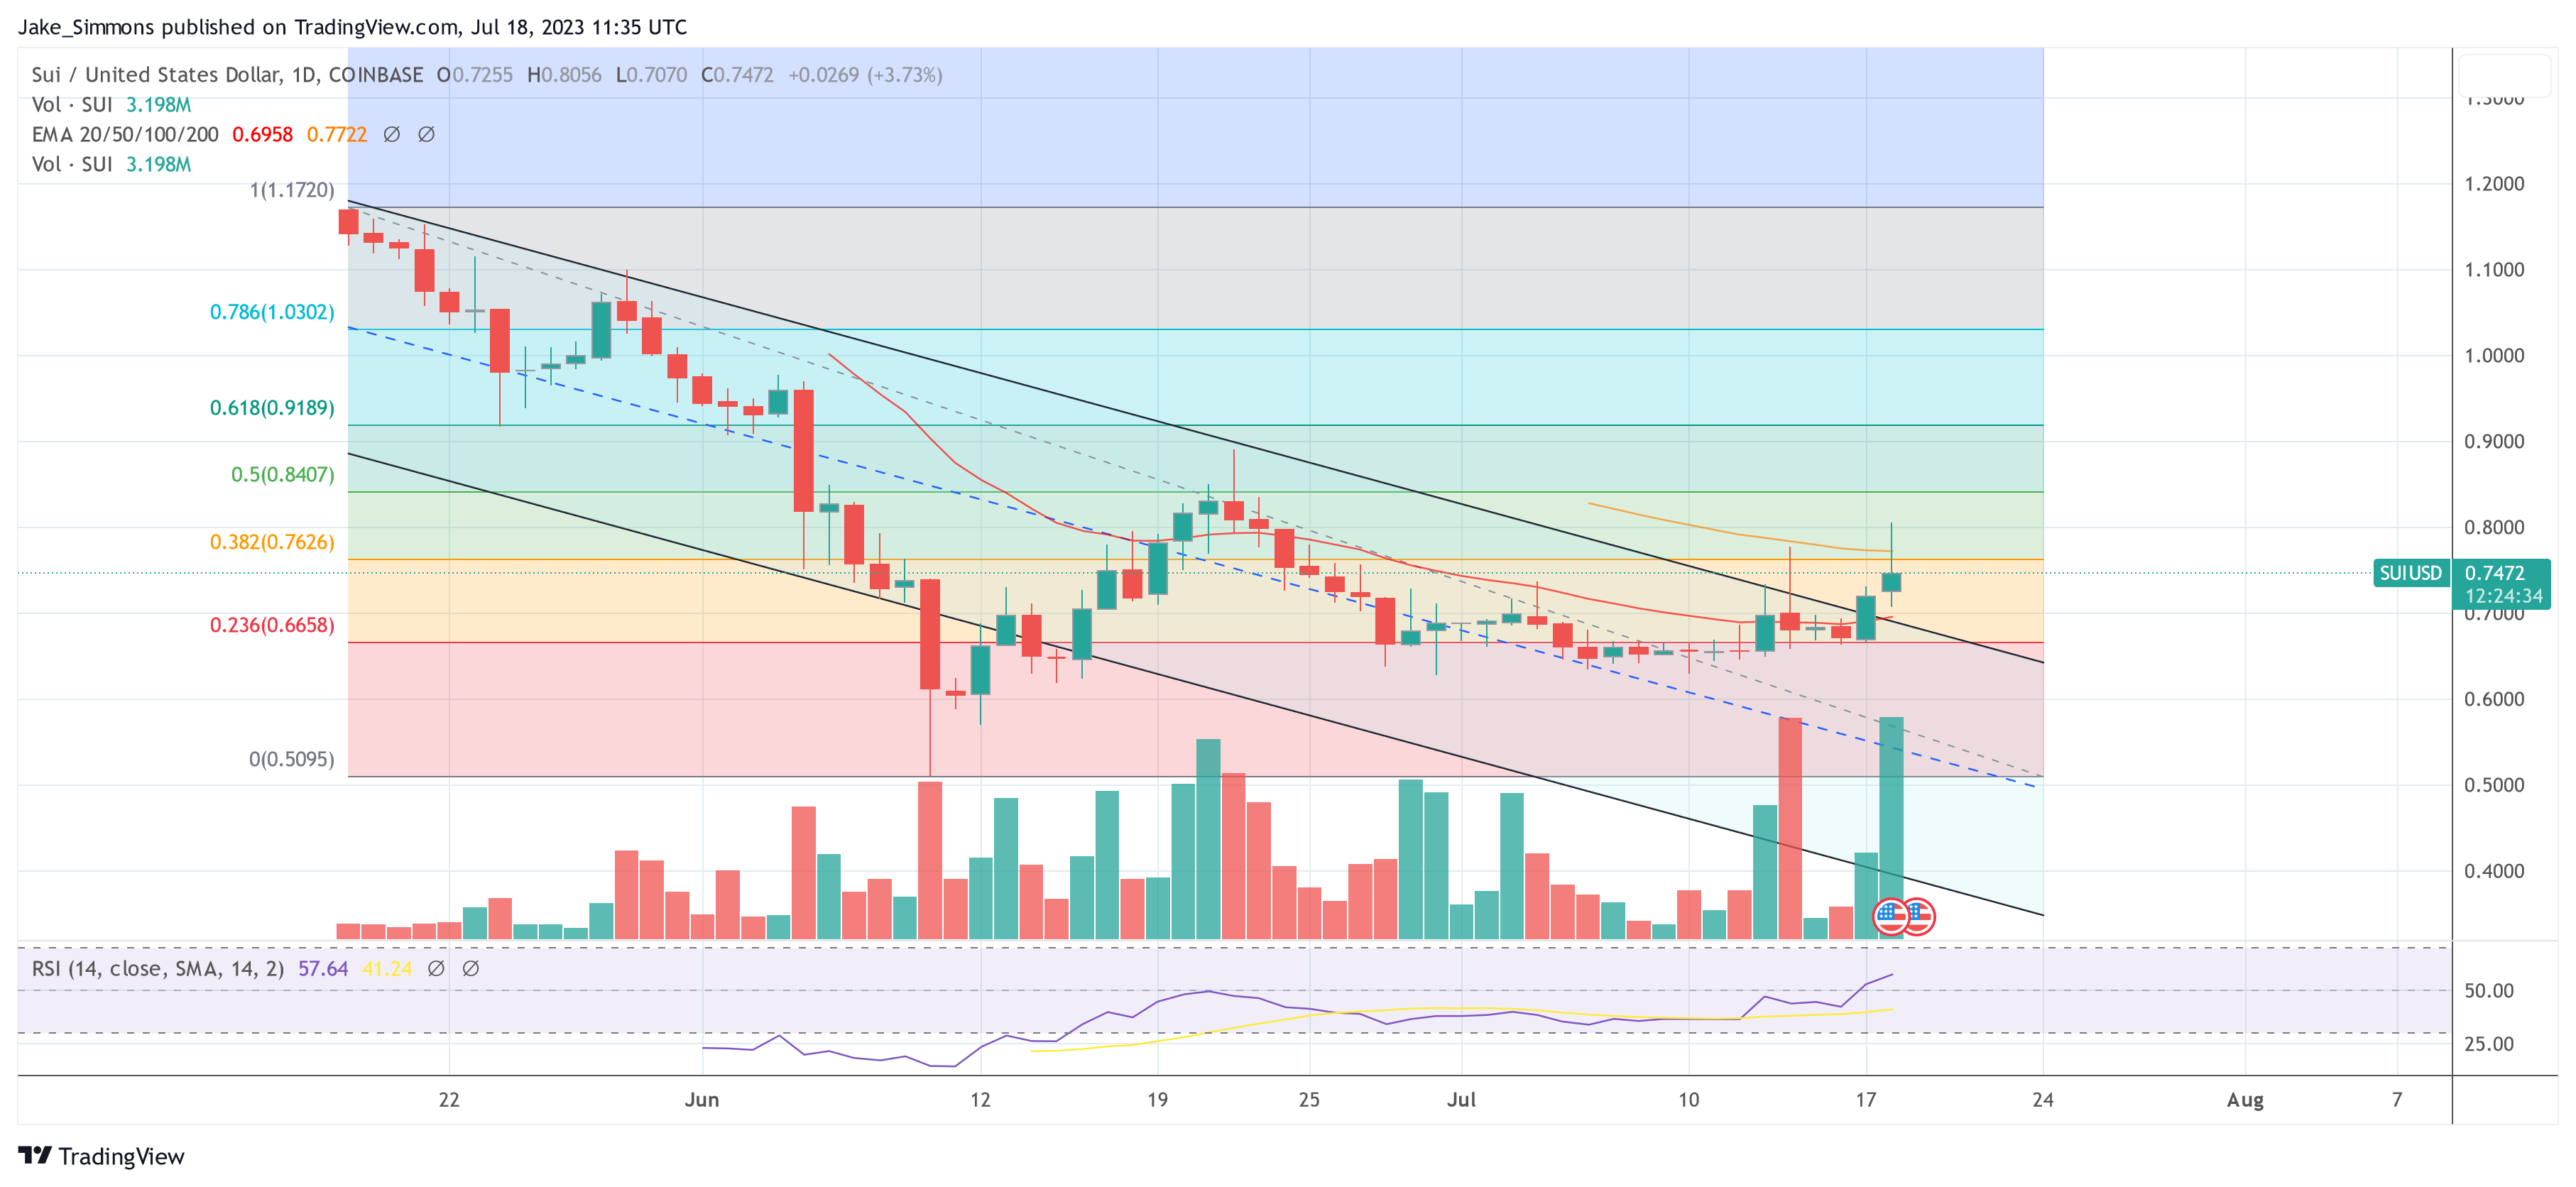 Price breaks out of downtrend, 1-day chart